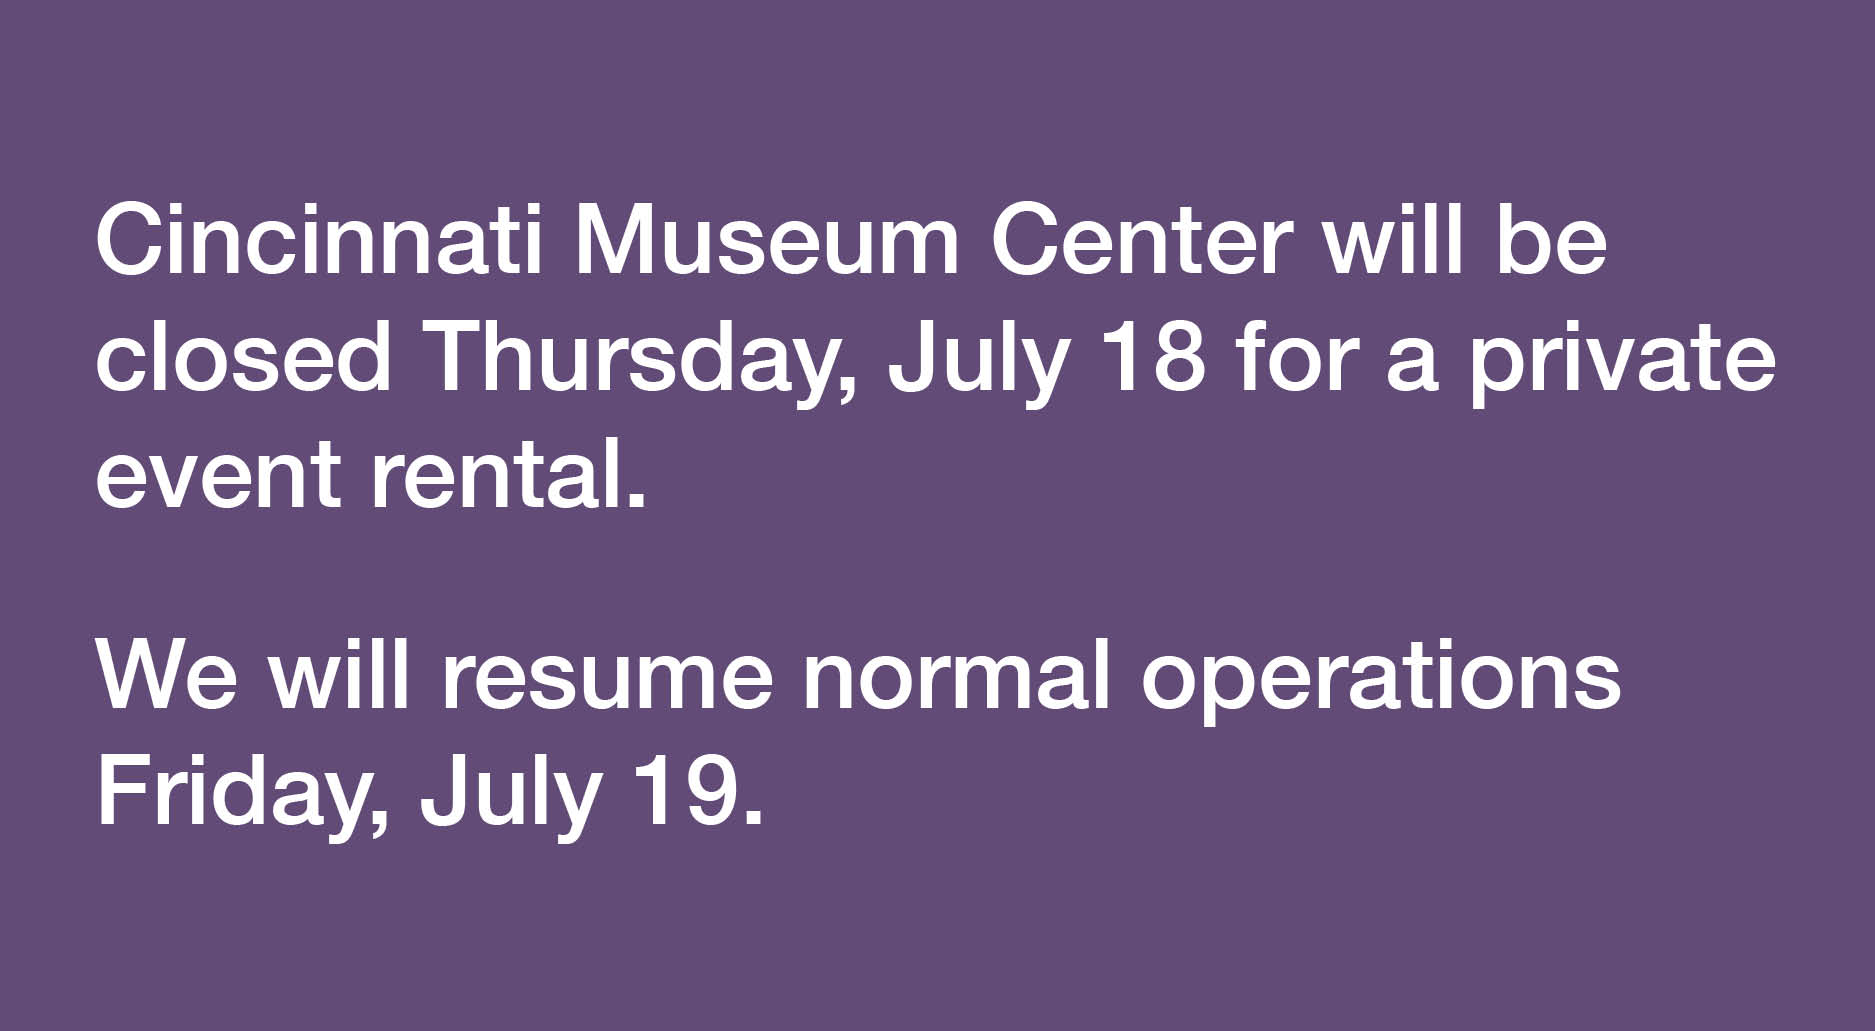 Cincinnati Museum Center will be closed Thursday, July 18 for a private event rental. We will resume normal operations Friday, July 19.